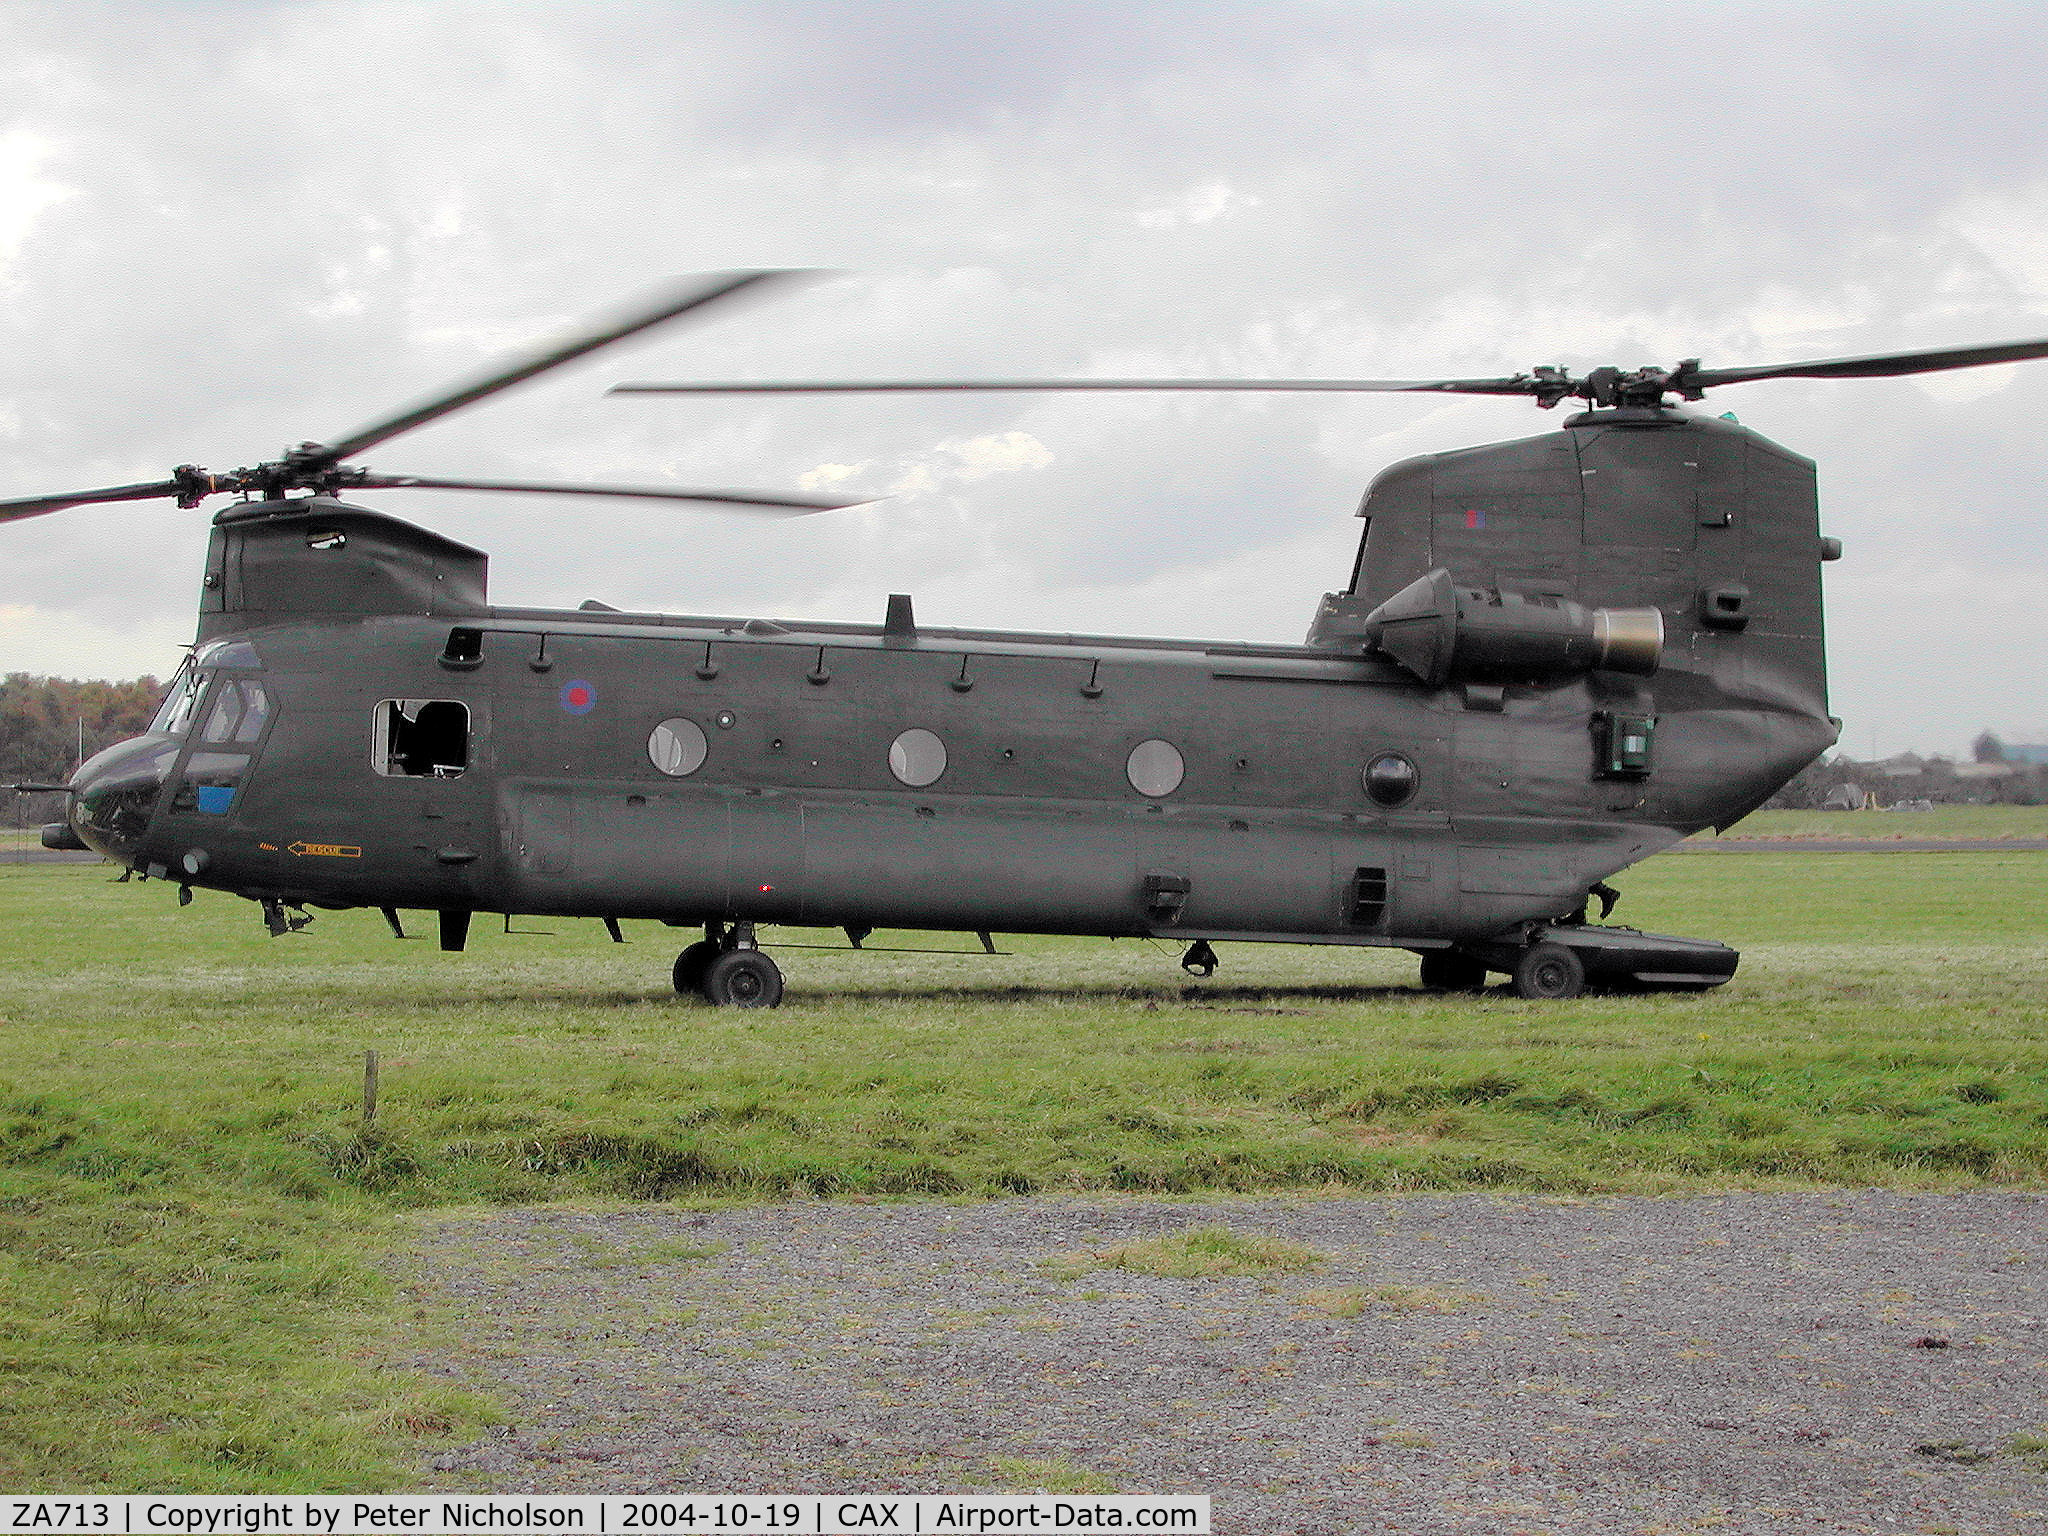 ZA713, 1981 Boeing Vertol Chinook HC.2 C/N M/A025/B-844/M7013, Chinook HC.2, callsign Firecrest 55, of 18 Squadron seen at Carlisle in October 2004.